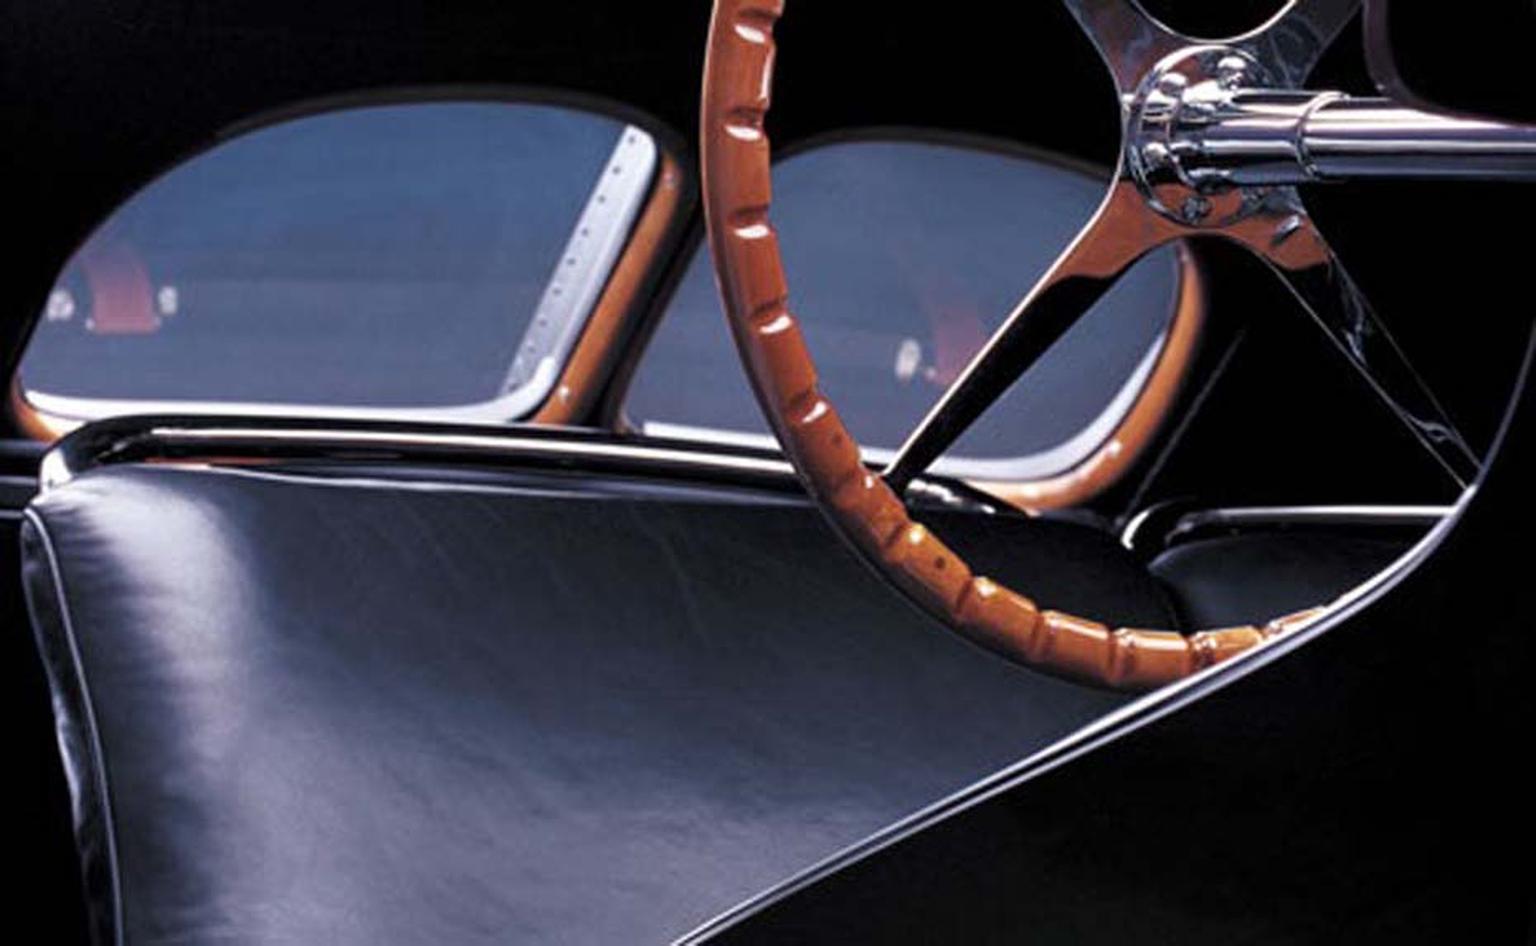 Interior of Ralph Lauren's black Bugatti Type 57SC Atlantic Coupe, a major source of inspiration for the Automotive Collection, incorporating details such as the wood dashboard and the six screws used on the hub to hold the Bugatti steering wheel to the c